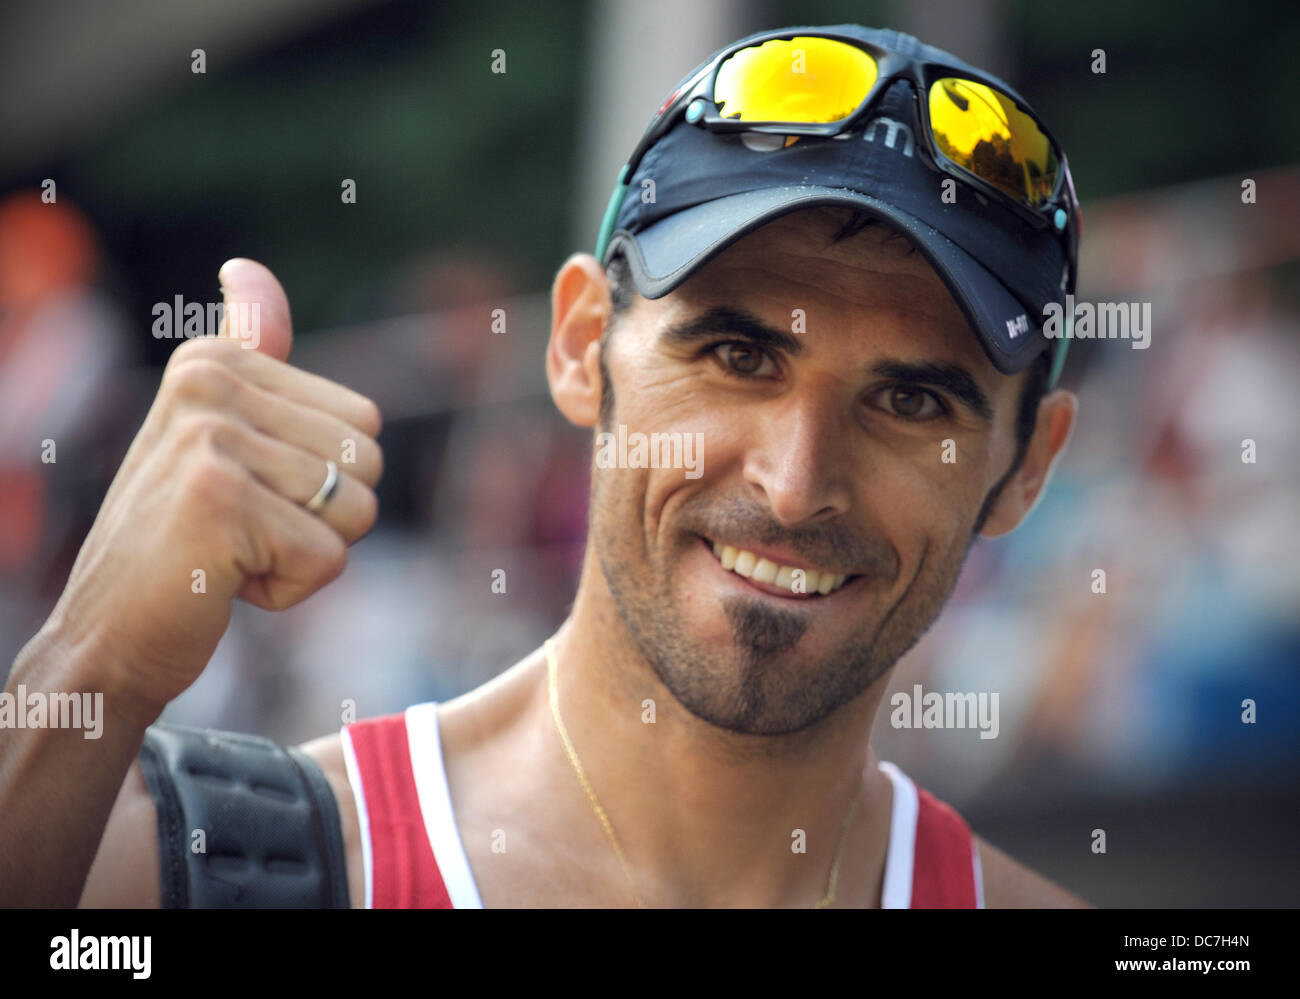 Berlin, Germany. 10th Aug, 2013. Pablo Herrera Allepuz from Spain celebrates his thrid place at the beach volleyball grand slam at the Waldbuehne in Berlin, Germany, 10 August 2013. Photo: OLIVER MEHLIS/dpa/Alamy Live News Stock Photo